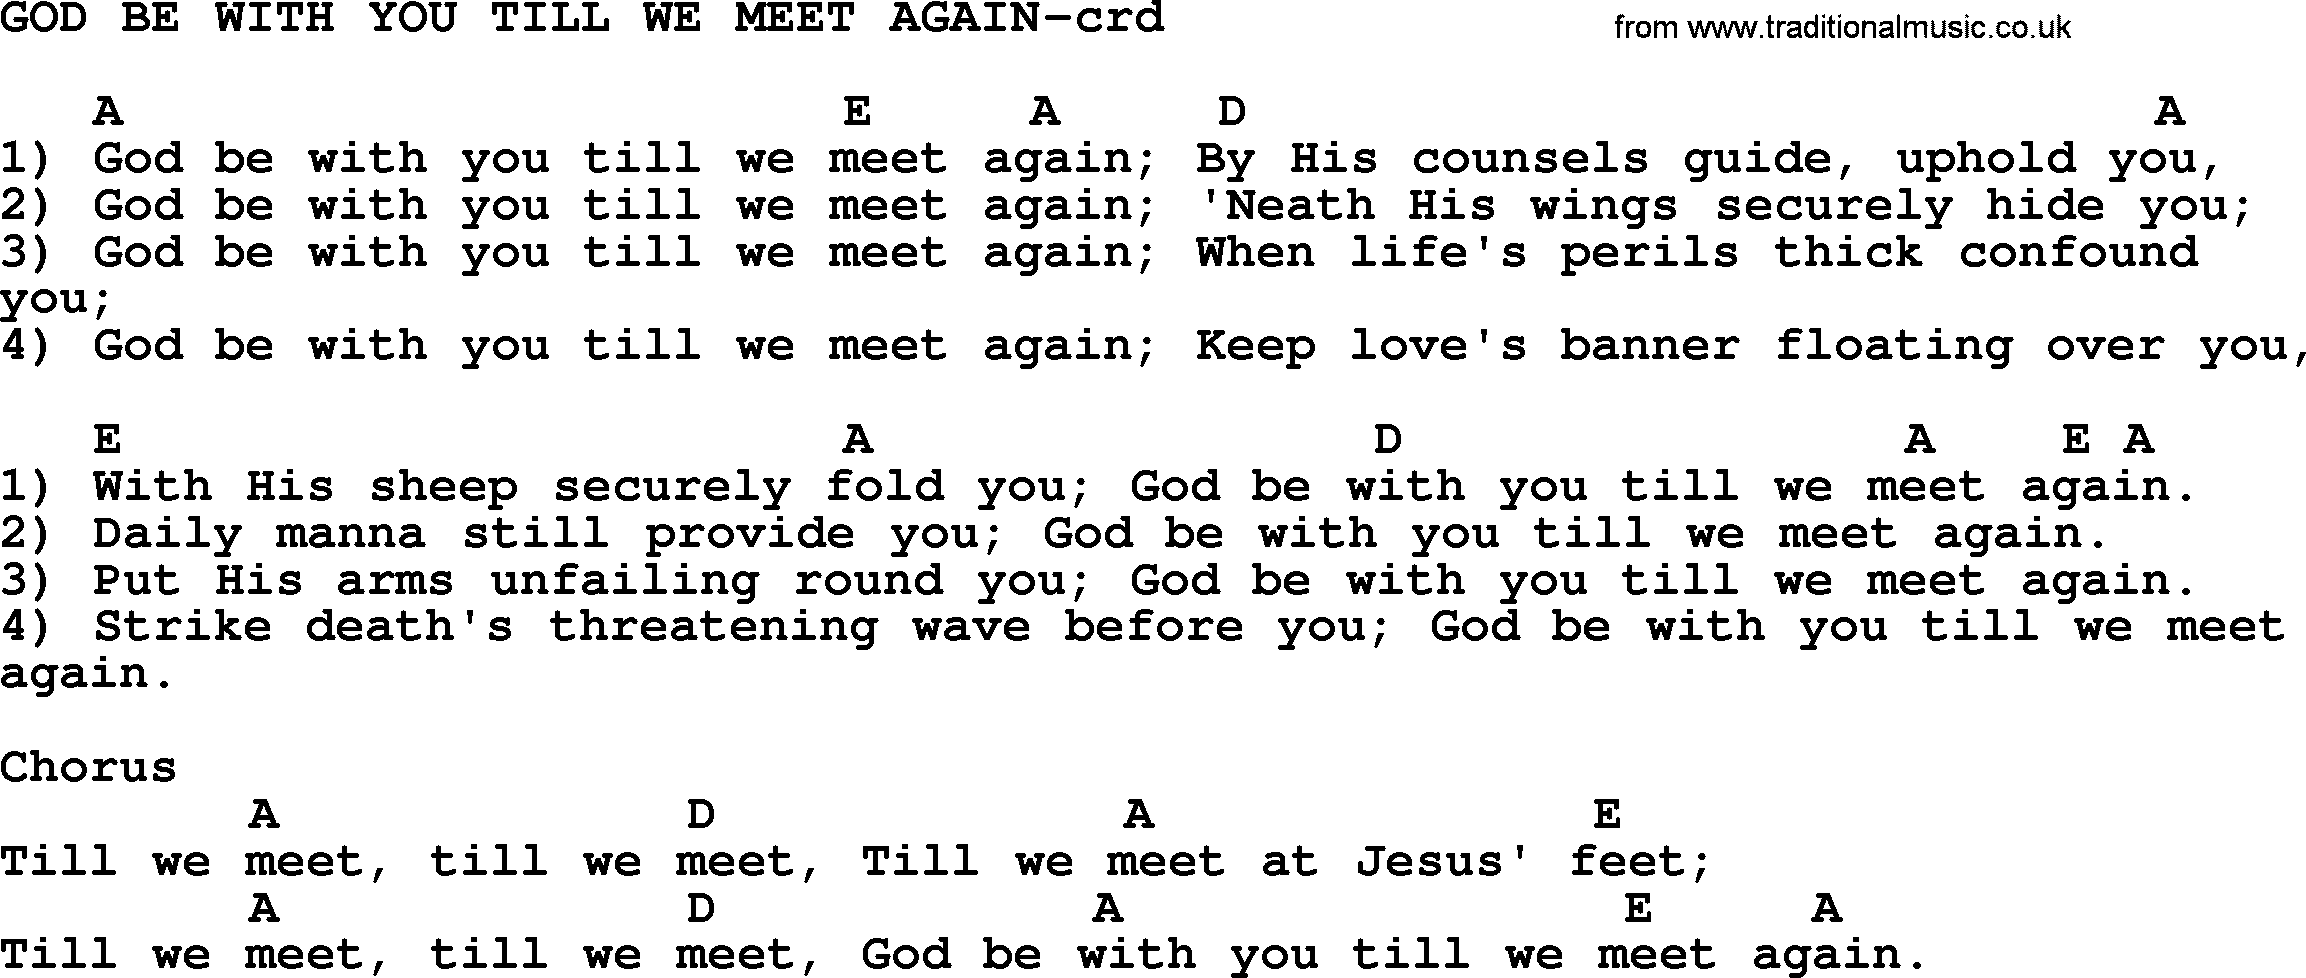 Top 500 Hymn: God Be With You Till We Meet Again, lyrics and chords